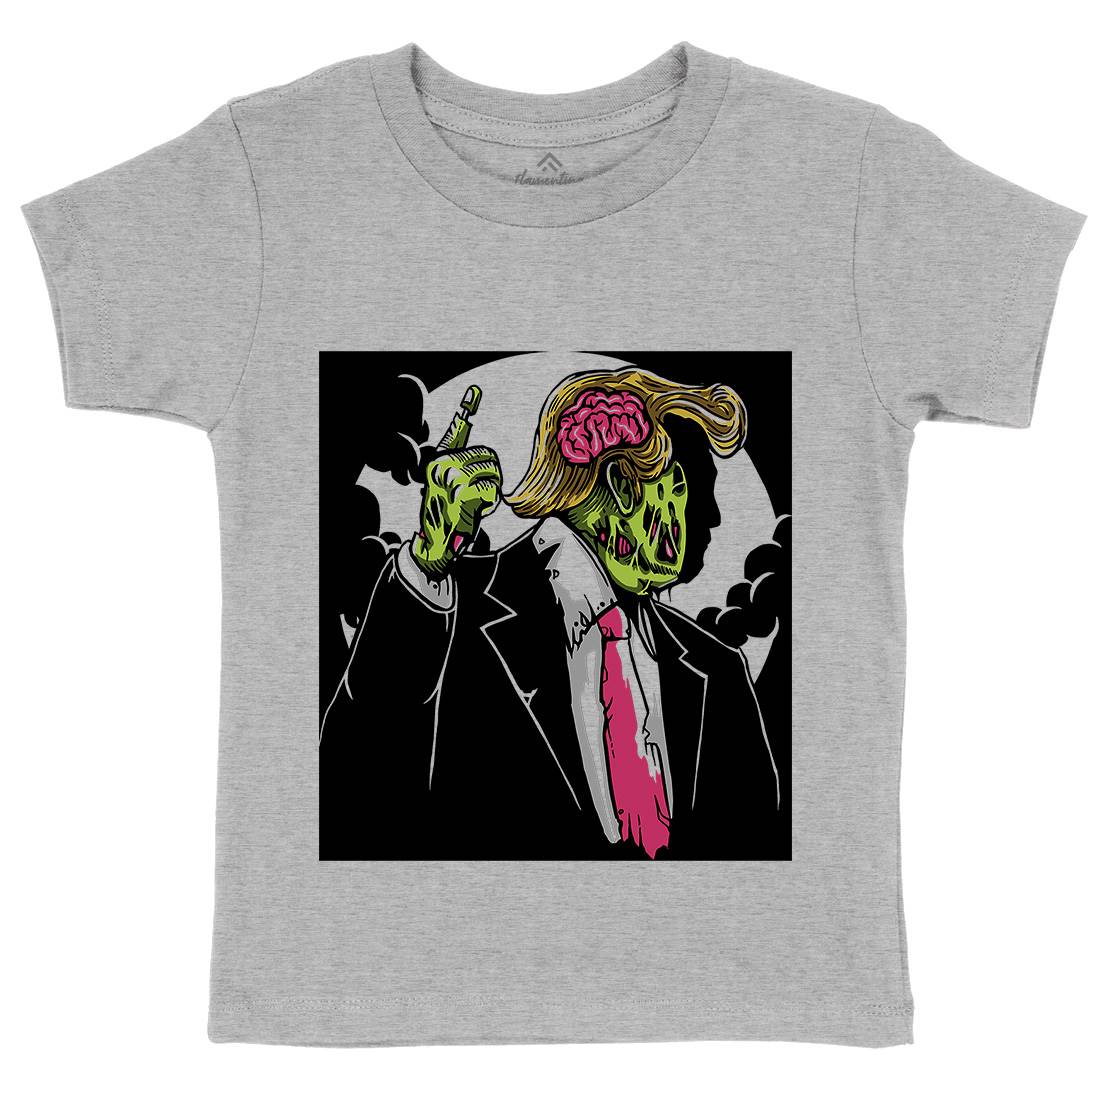 Make Zombie Great Again Kids Crew Neck T-Shirt Horror A554